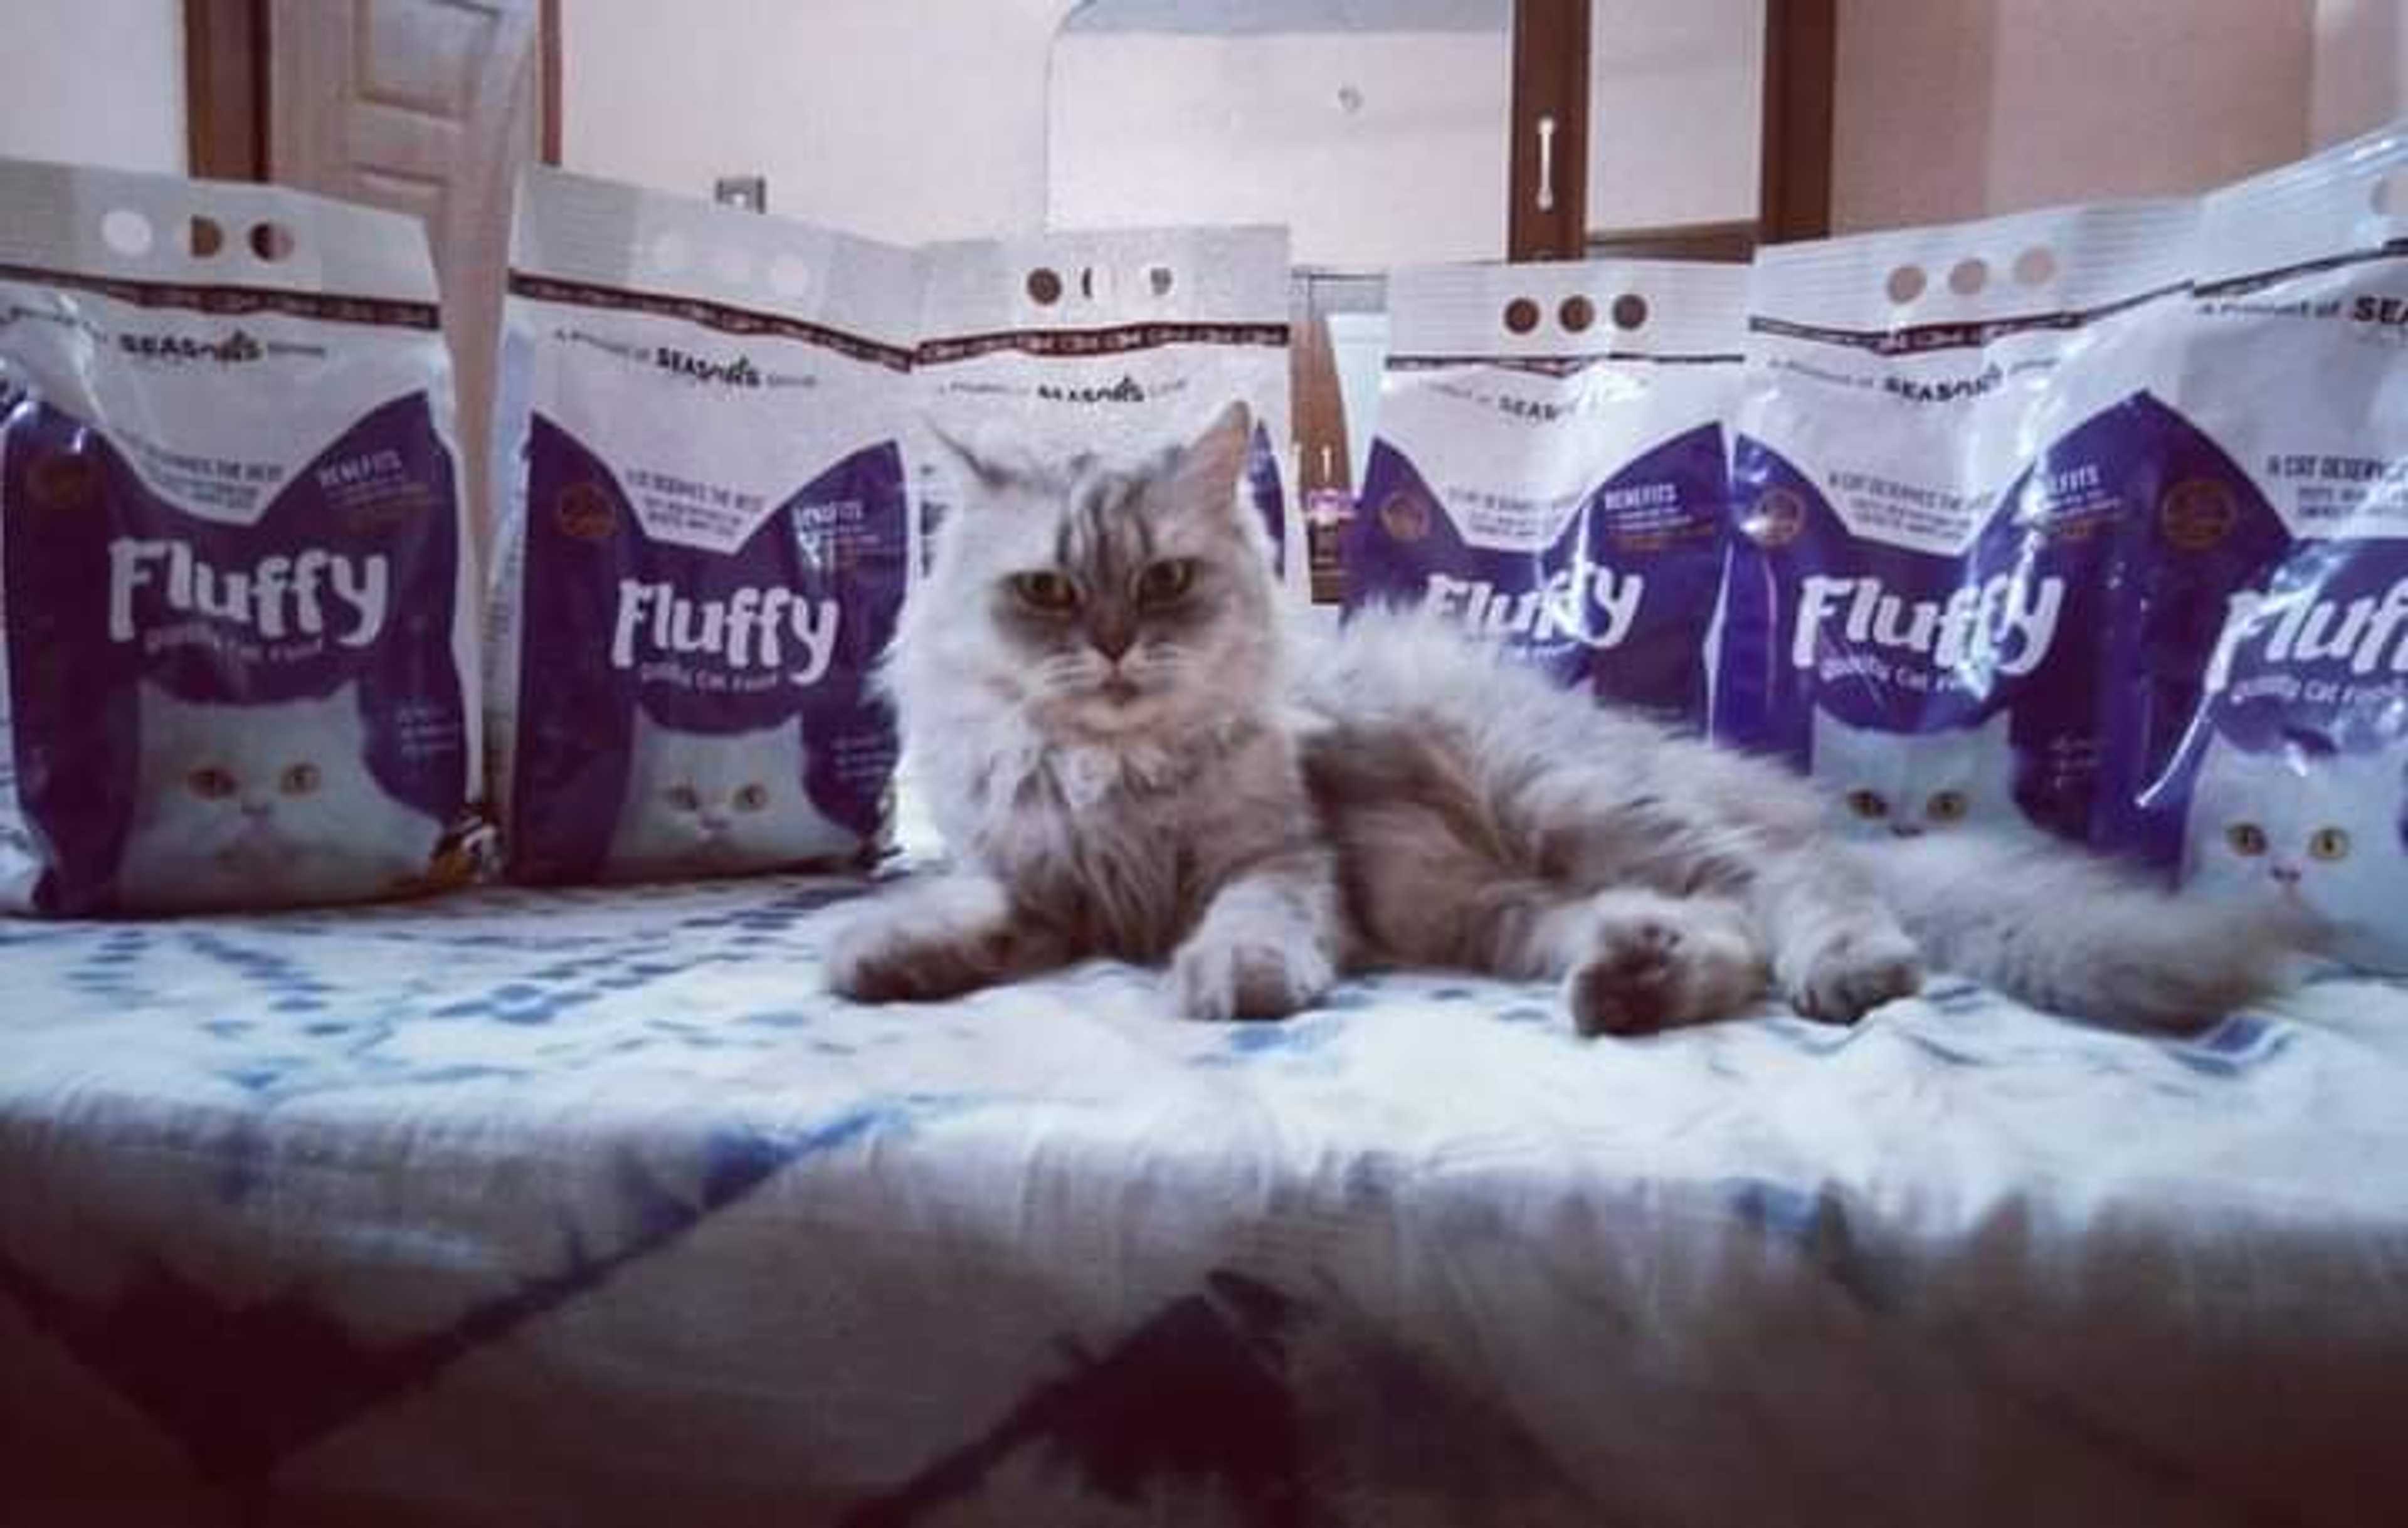 Fluffy cat food 1.2 KG Pack - Healthy Quality Dry Cat Food contains Real Fish and chicken Best food for Cats - Suitable for all ages Taking good care of nutrition and taste, Fluffy Cat Food makes a cat healthy, Best Kitten Food new best friend of your cat